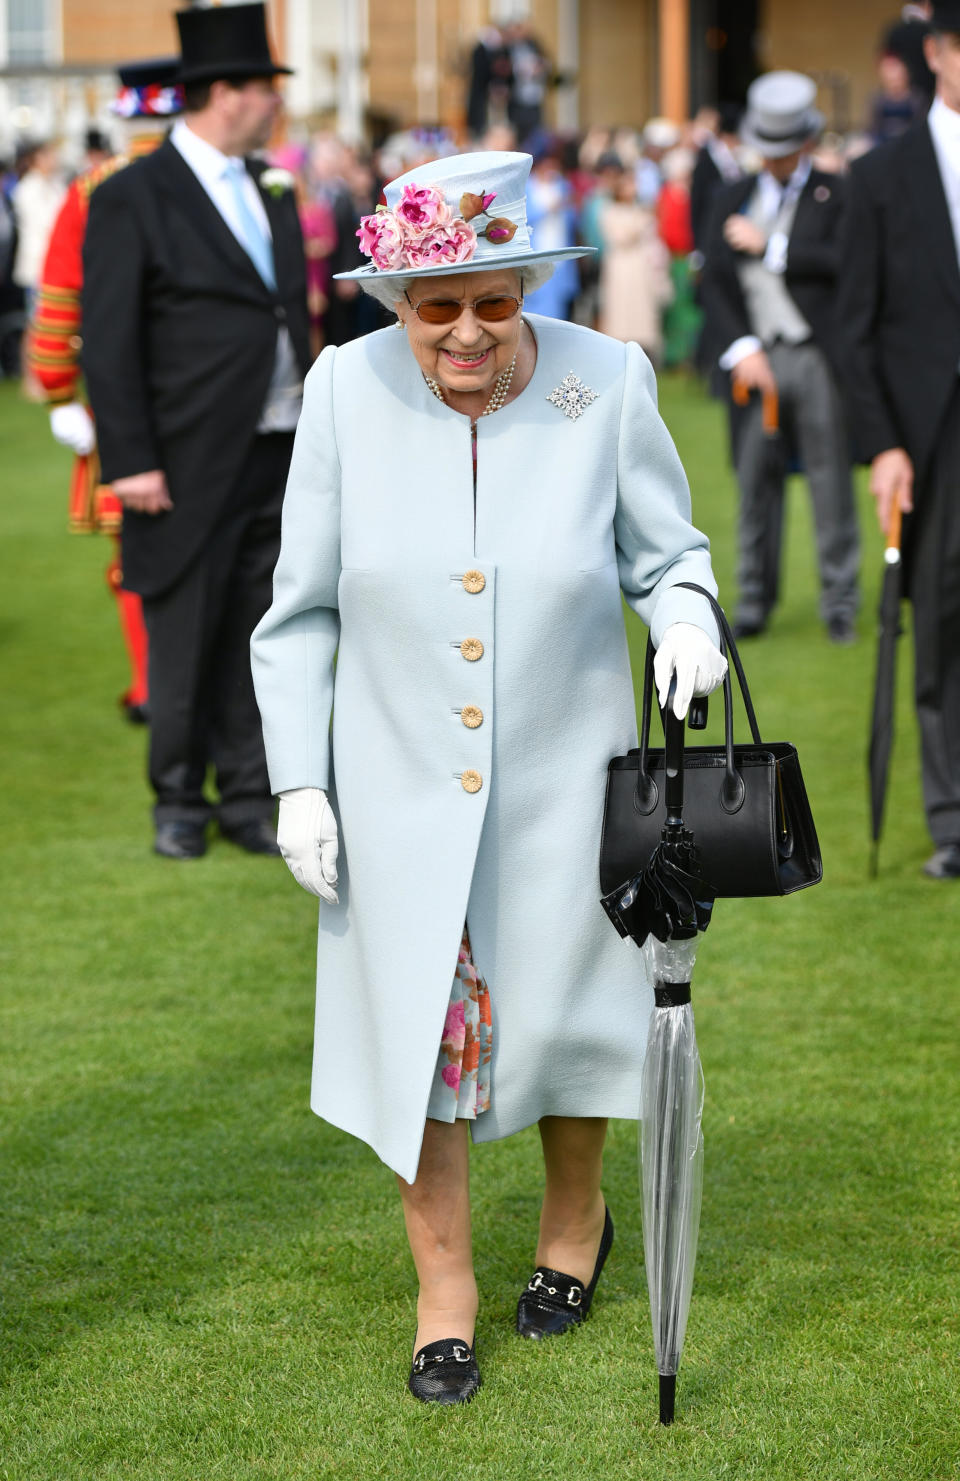 Queen Elizabeth II attending the Royal Garden Party at Buckingham Palace on May 21, 2019 in London, England. Photo: Getty Images